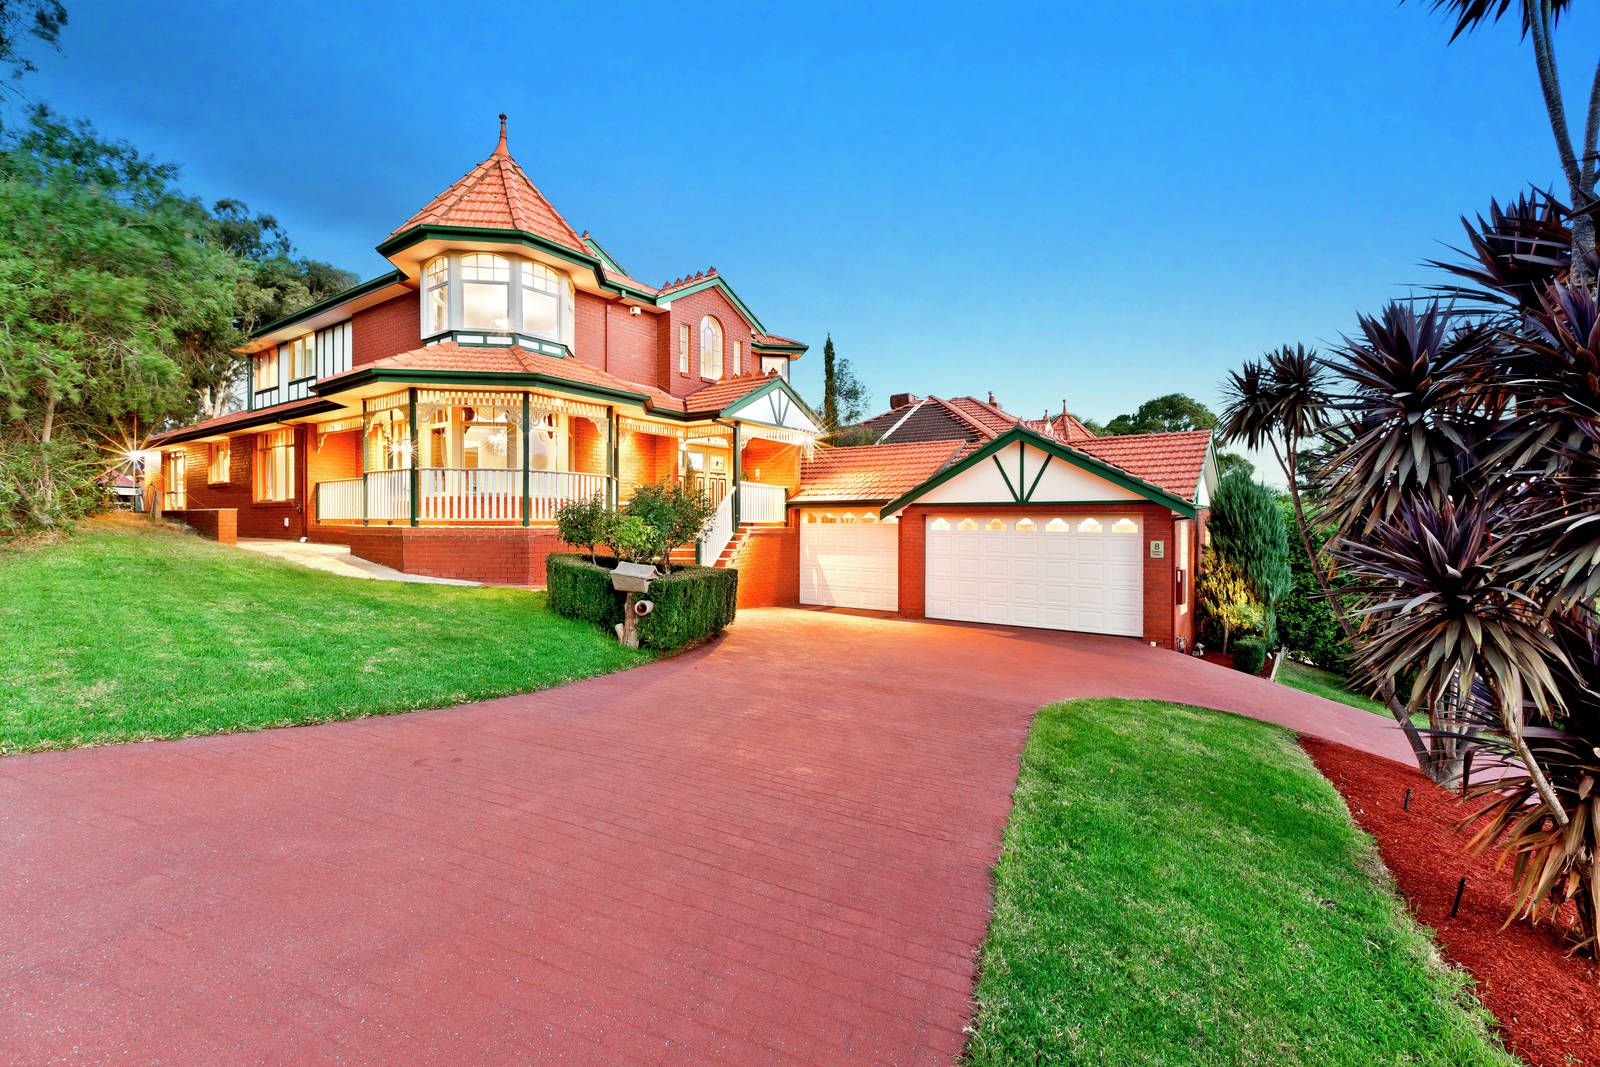 8 Catalina Court Eltham Property History Address Research Domain